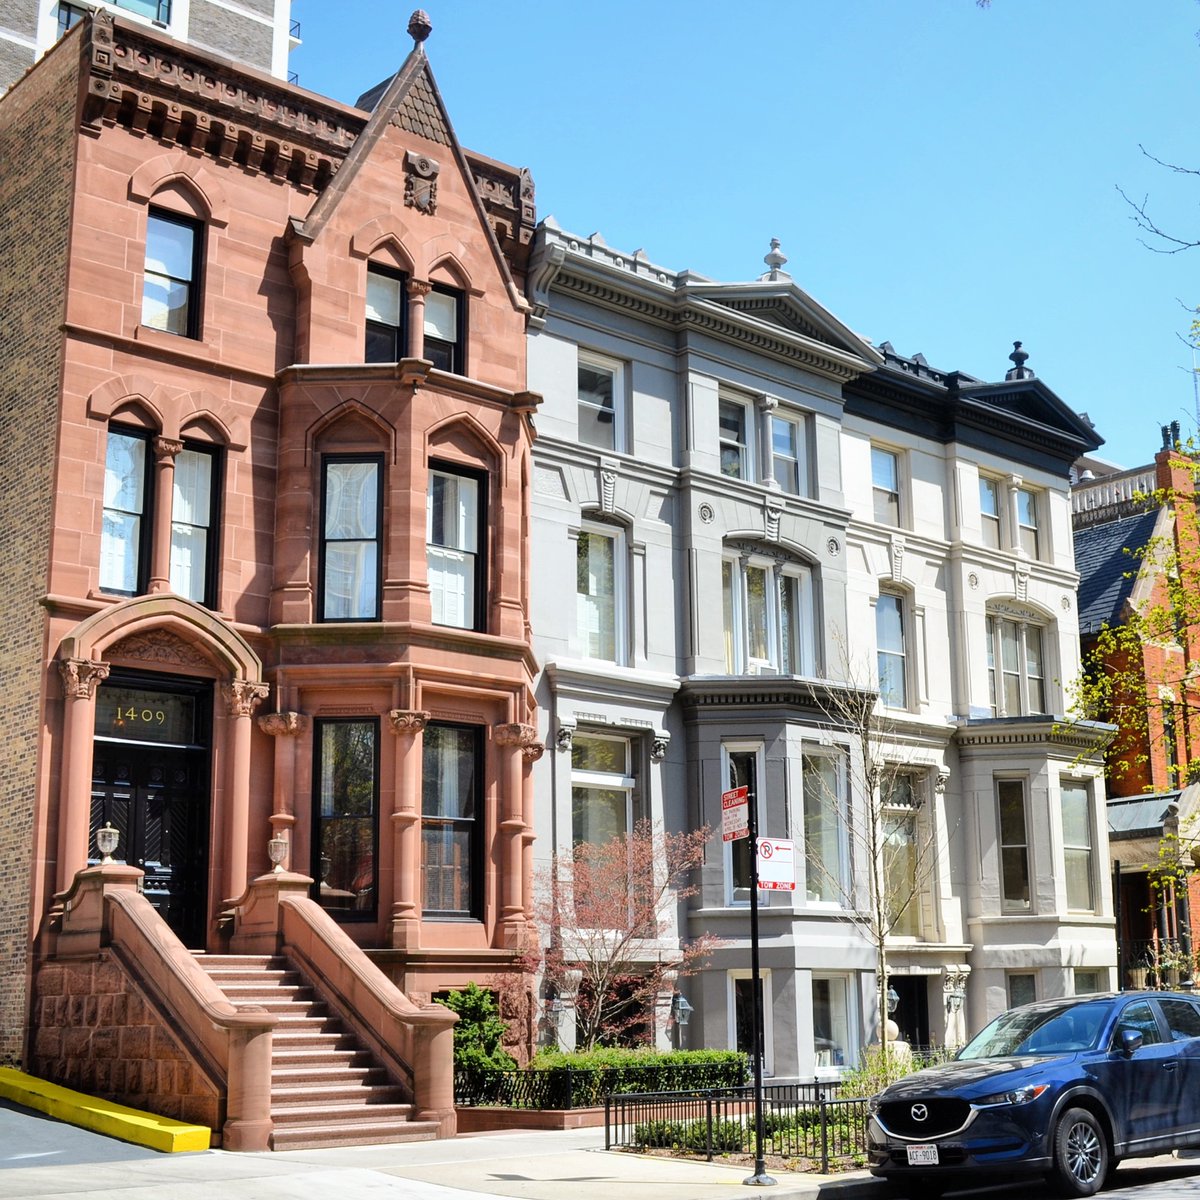 I’m gonna call this next architectural boredom thread “houses touching houses,” you know, row houses and the like. Here are some examples in Chicago’s Gold Coast.